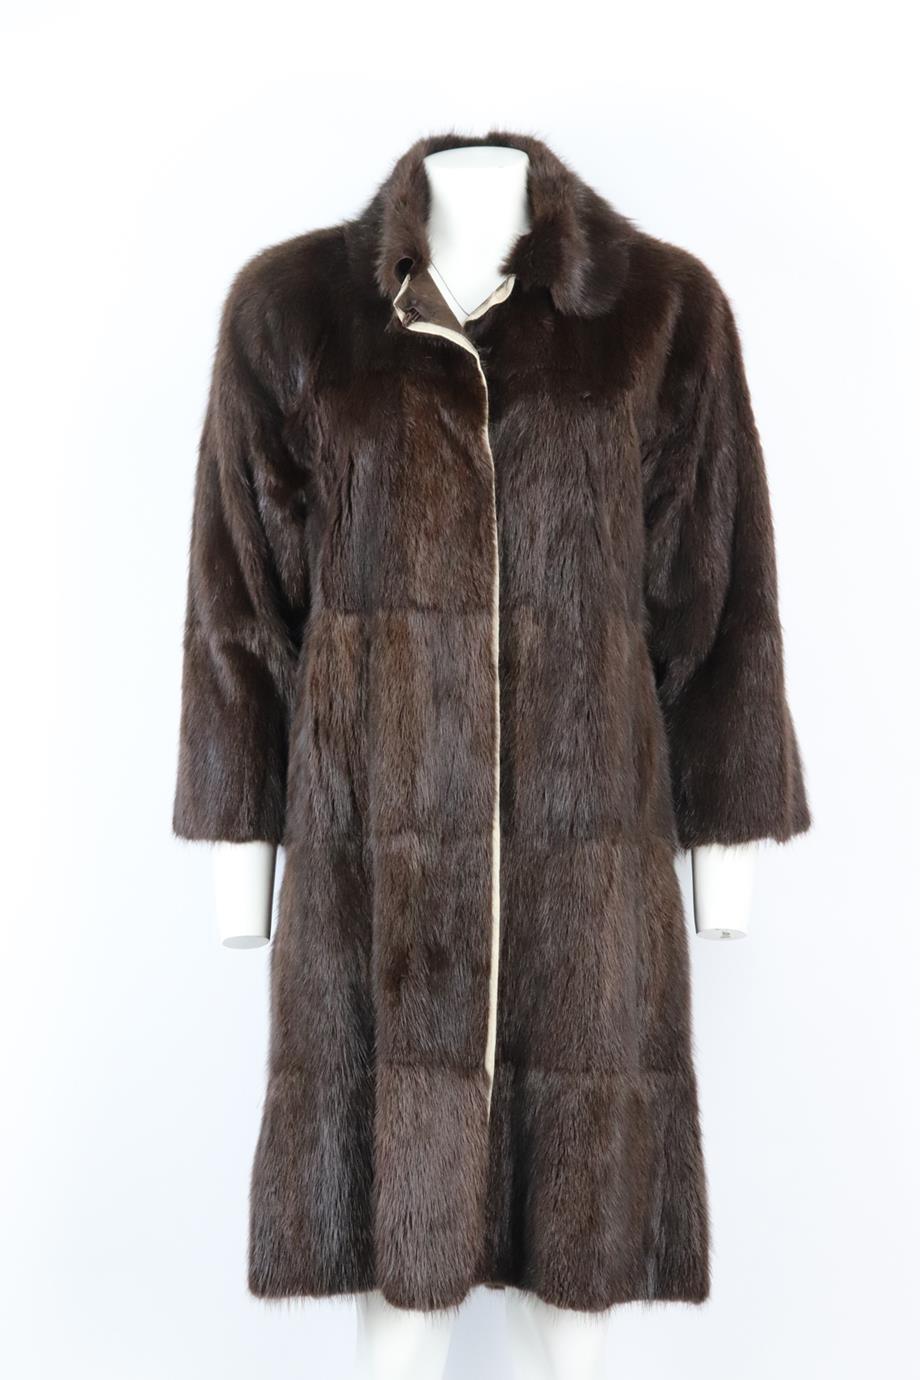 Marni Vintage rabbit fur coat. Brown. Long sleeve, crewneck. Hook and eye fastening at front. Size: IT 42 (UK 10, US 6, FR 38). Shoulder to shoulder: 18 in. Bust: 36 in. Waist: 36 in. Hips: 38 in. Length: 38 in. Fair condition - Composition label